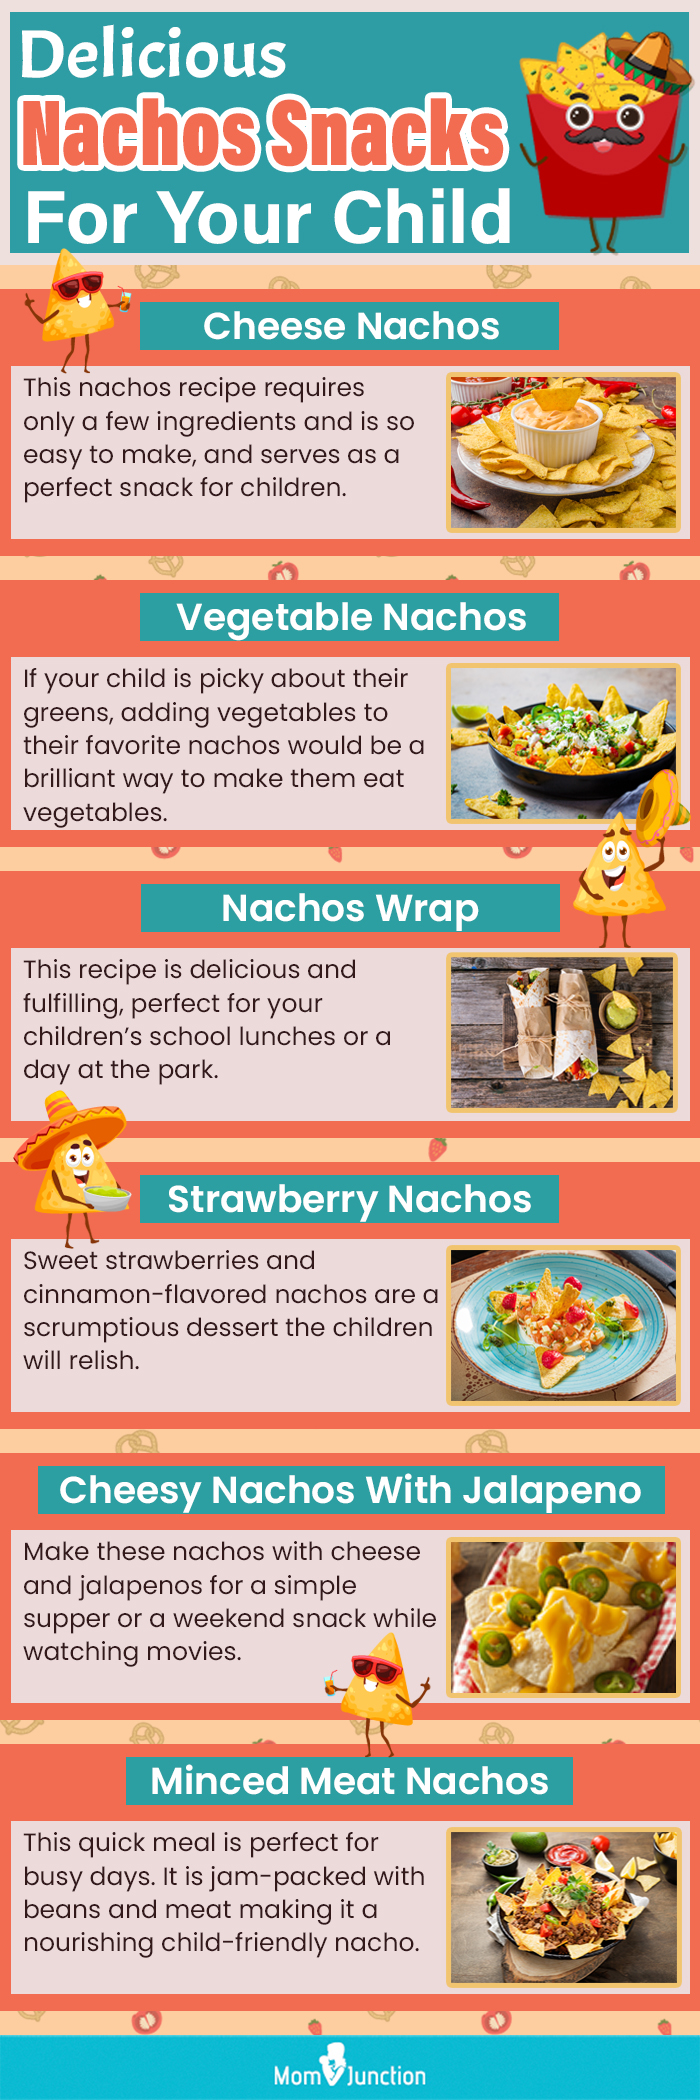 delicious nachos snacks for your child (infographic)